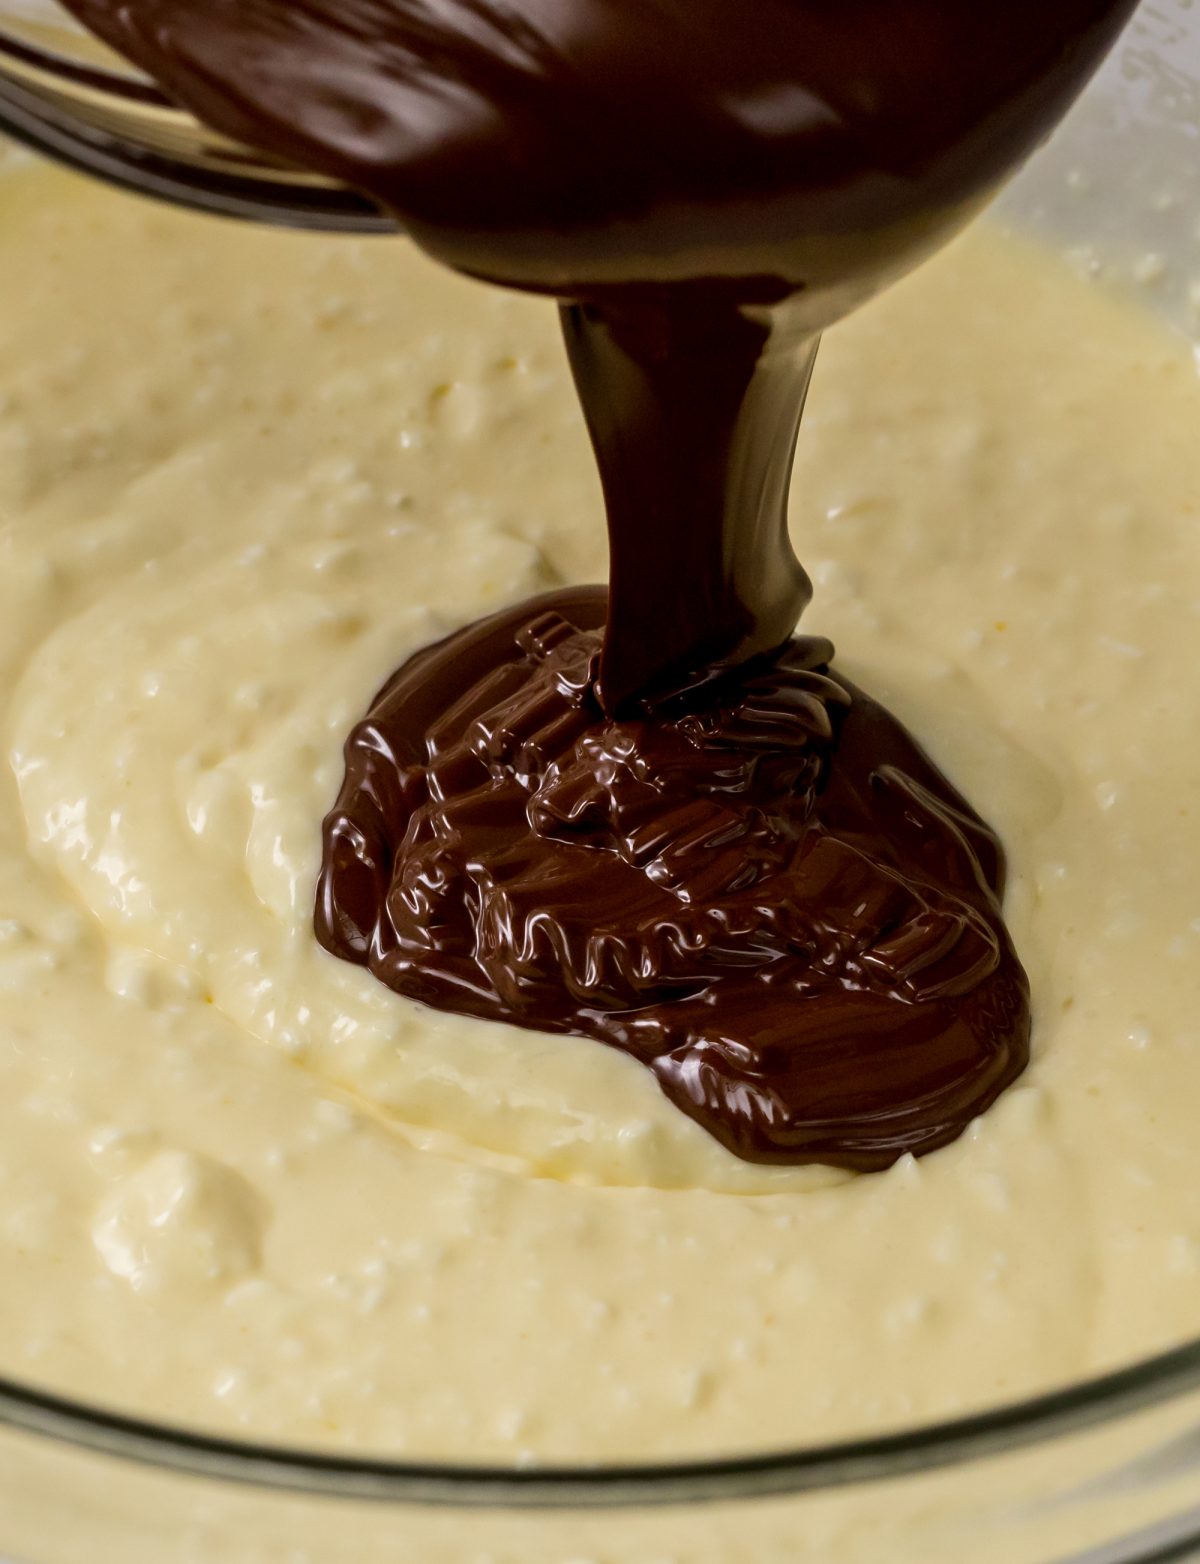 Adding the creamy chocolate to the batter